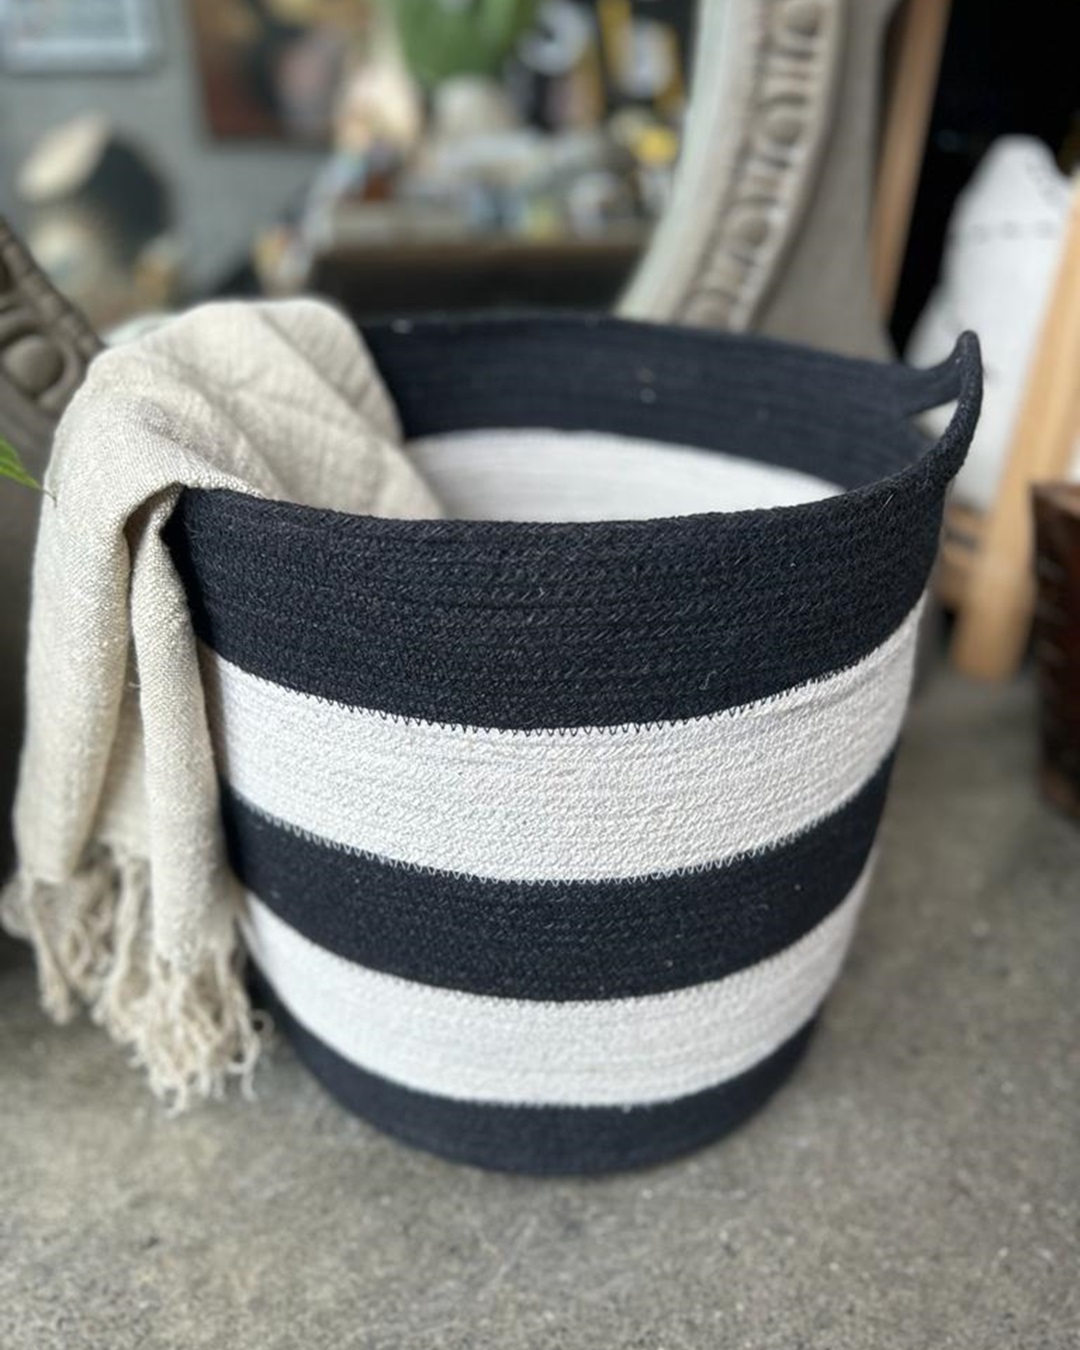 Black and white stripe jute basket with throw inside